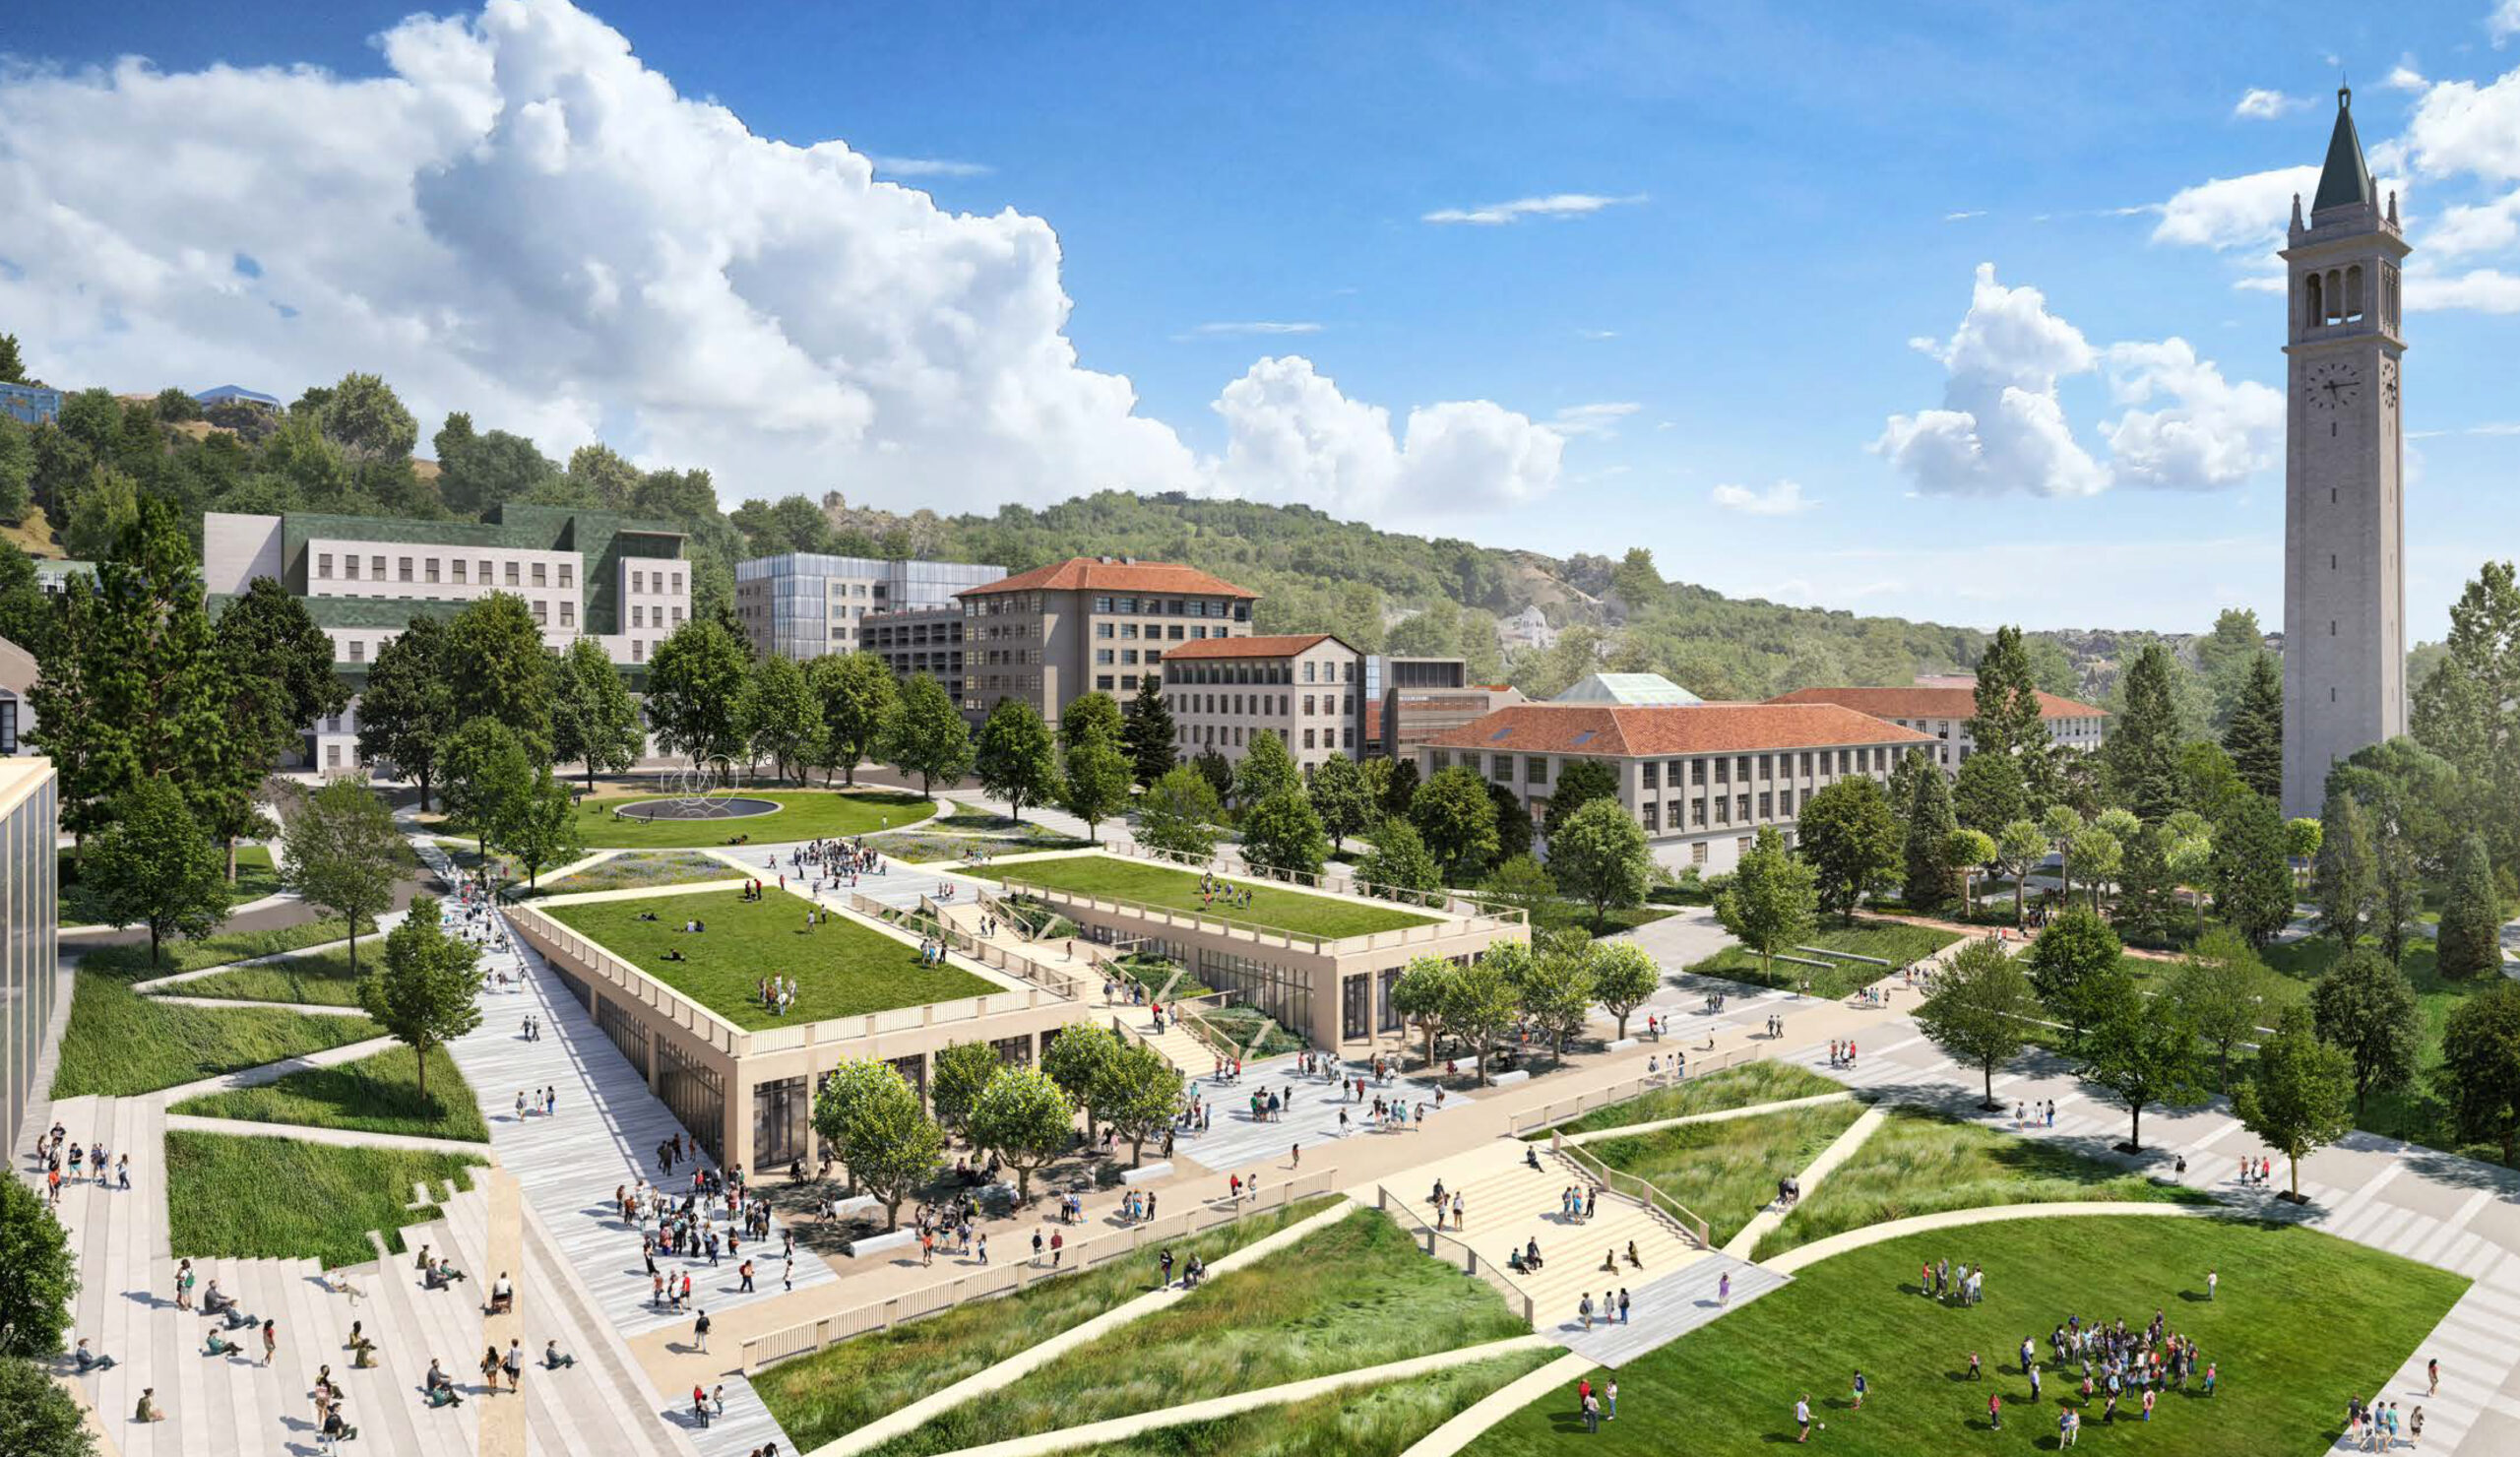 An artist's rendering of what UC Berkeley's campus will look like in the future according to the campus master plan